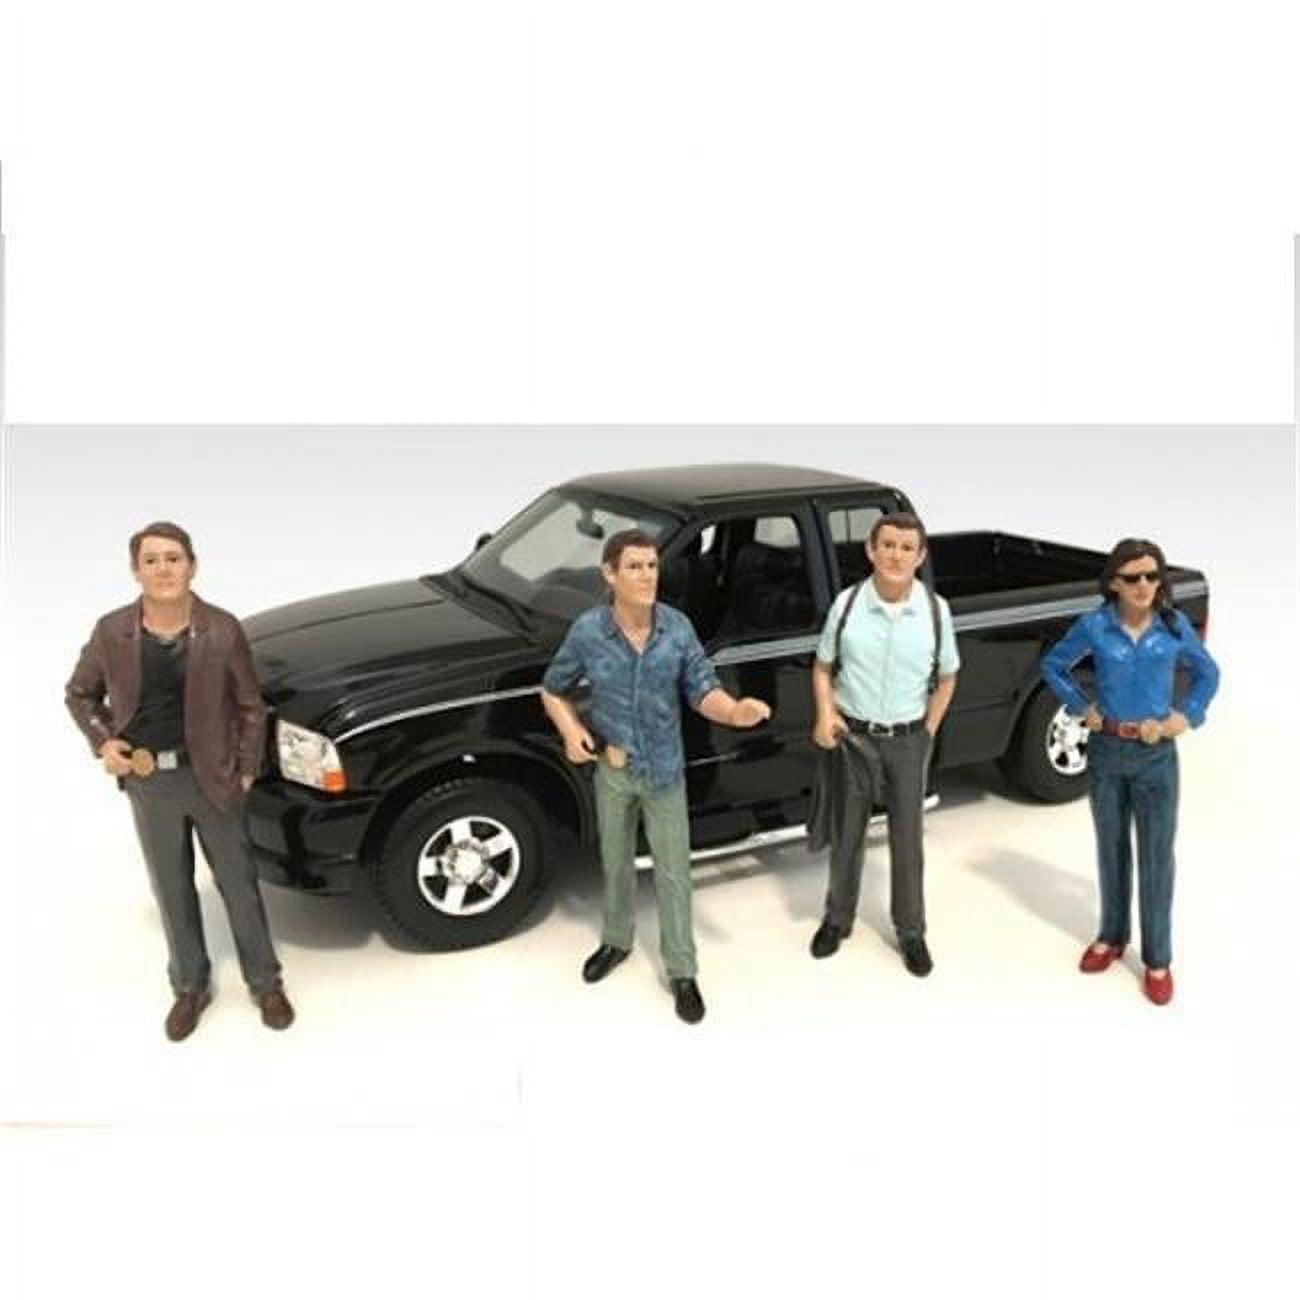 23929-23930-23931-23932 The Detective Figure Set For 1-24 Scale Models, 4 Piece